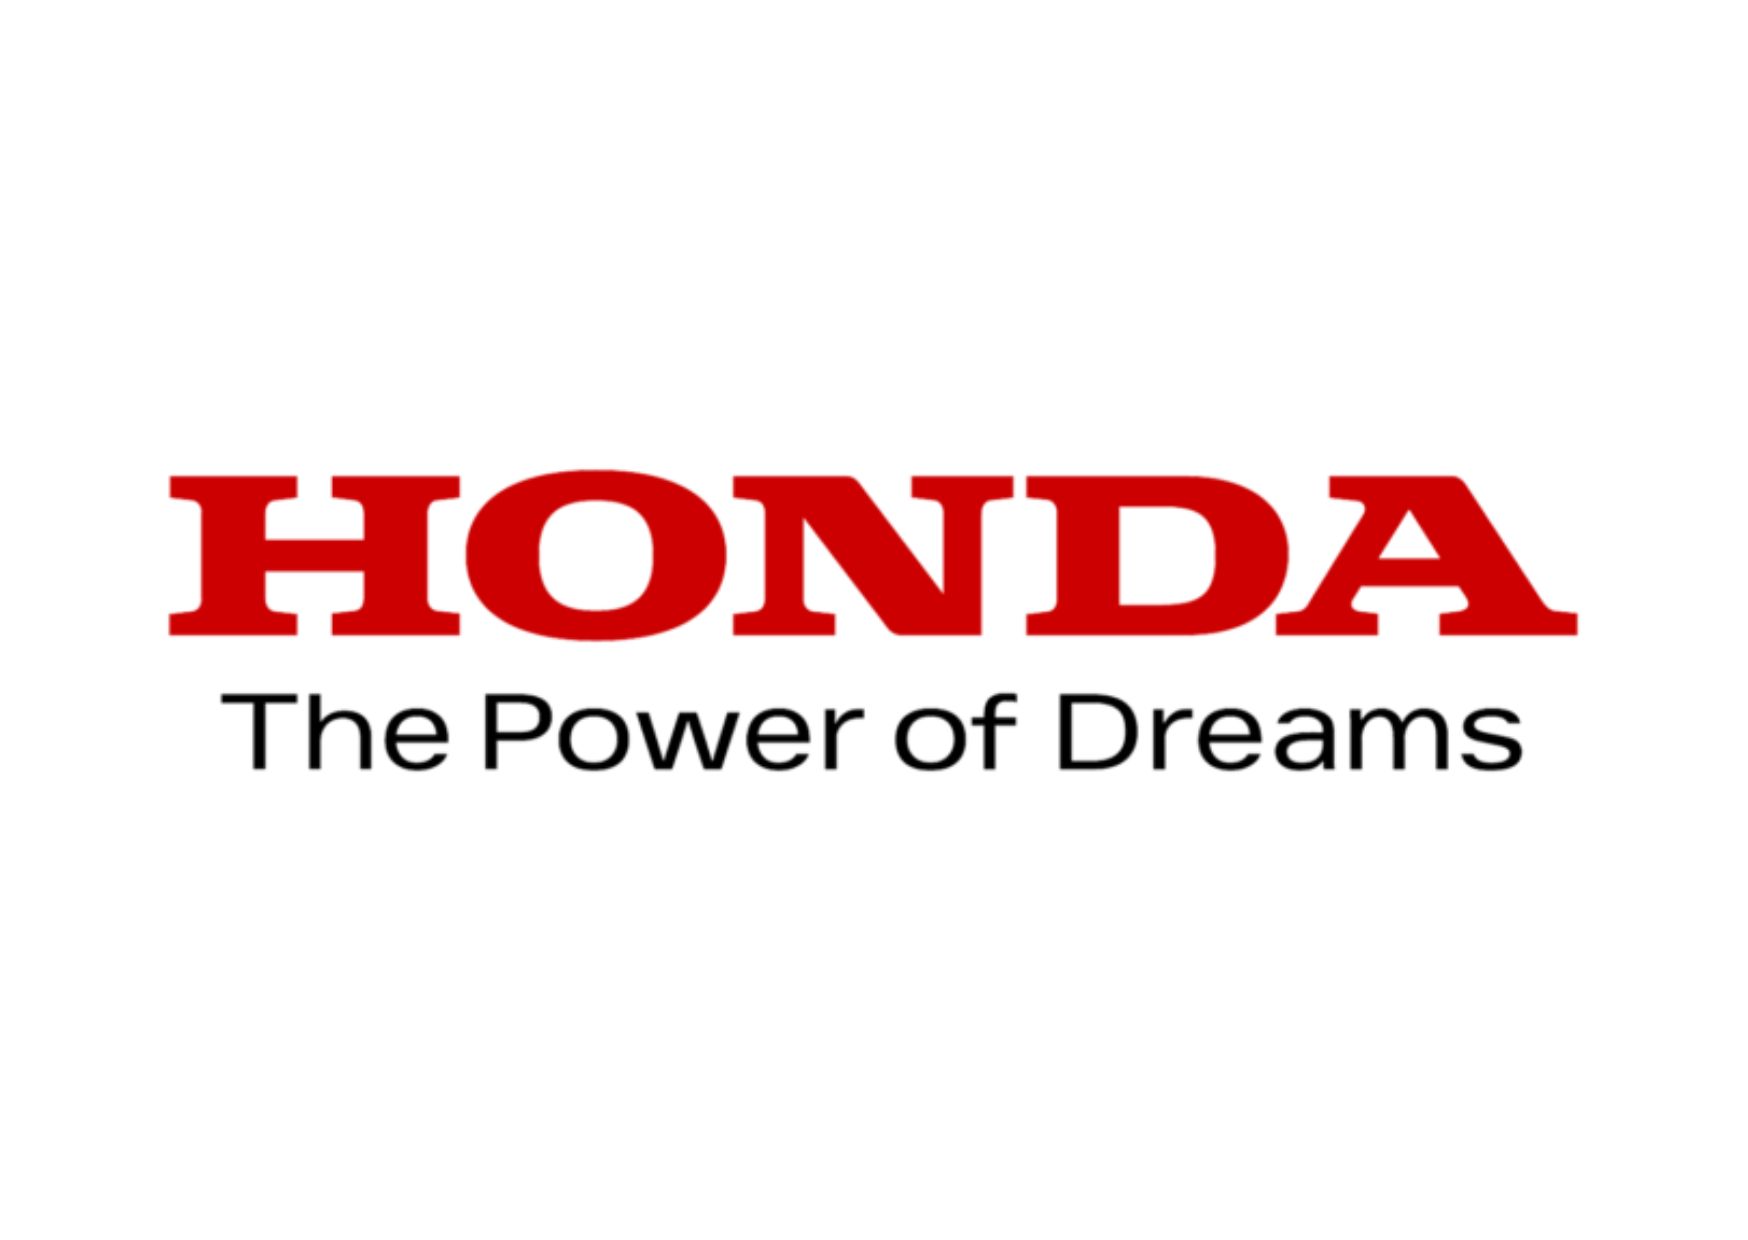 Honda shares corporate transformation and electrification initiatives